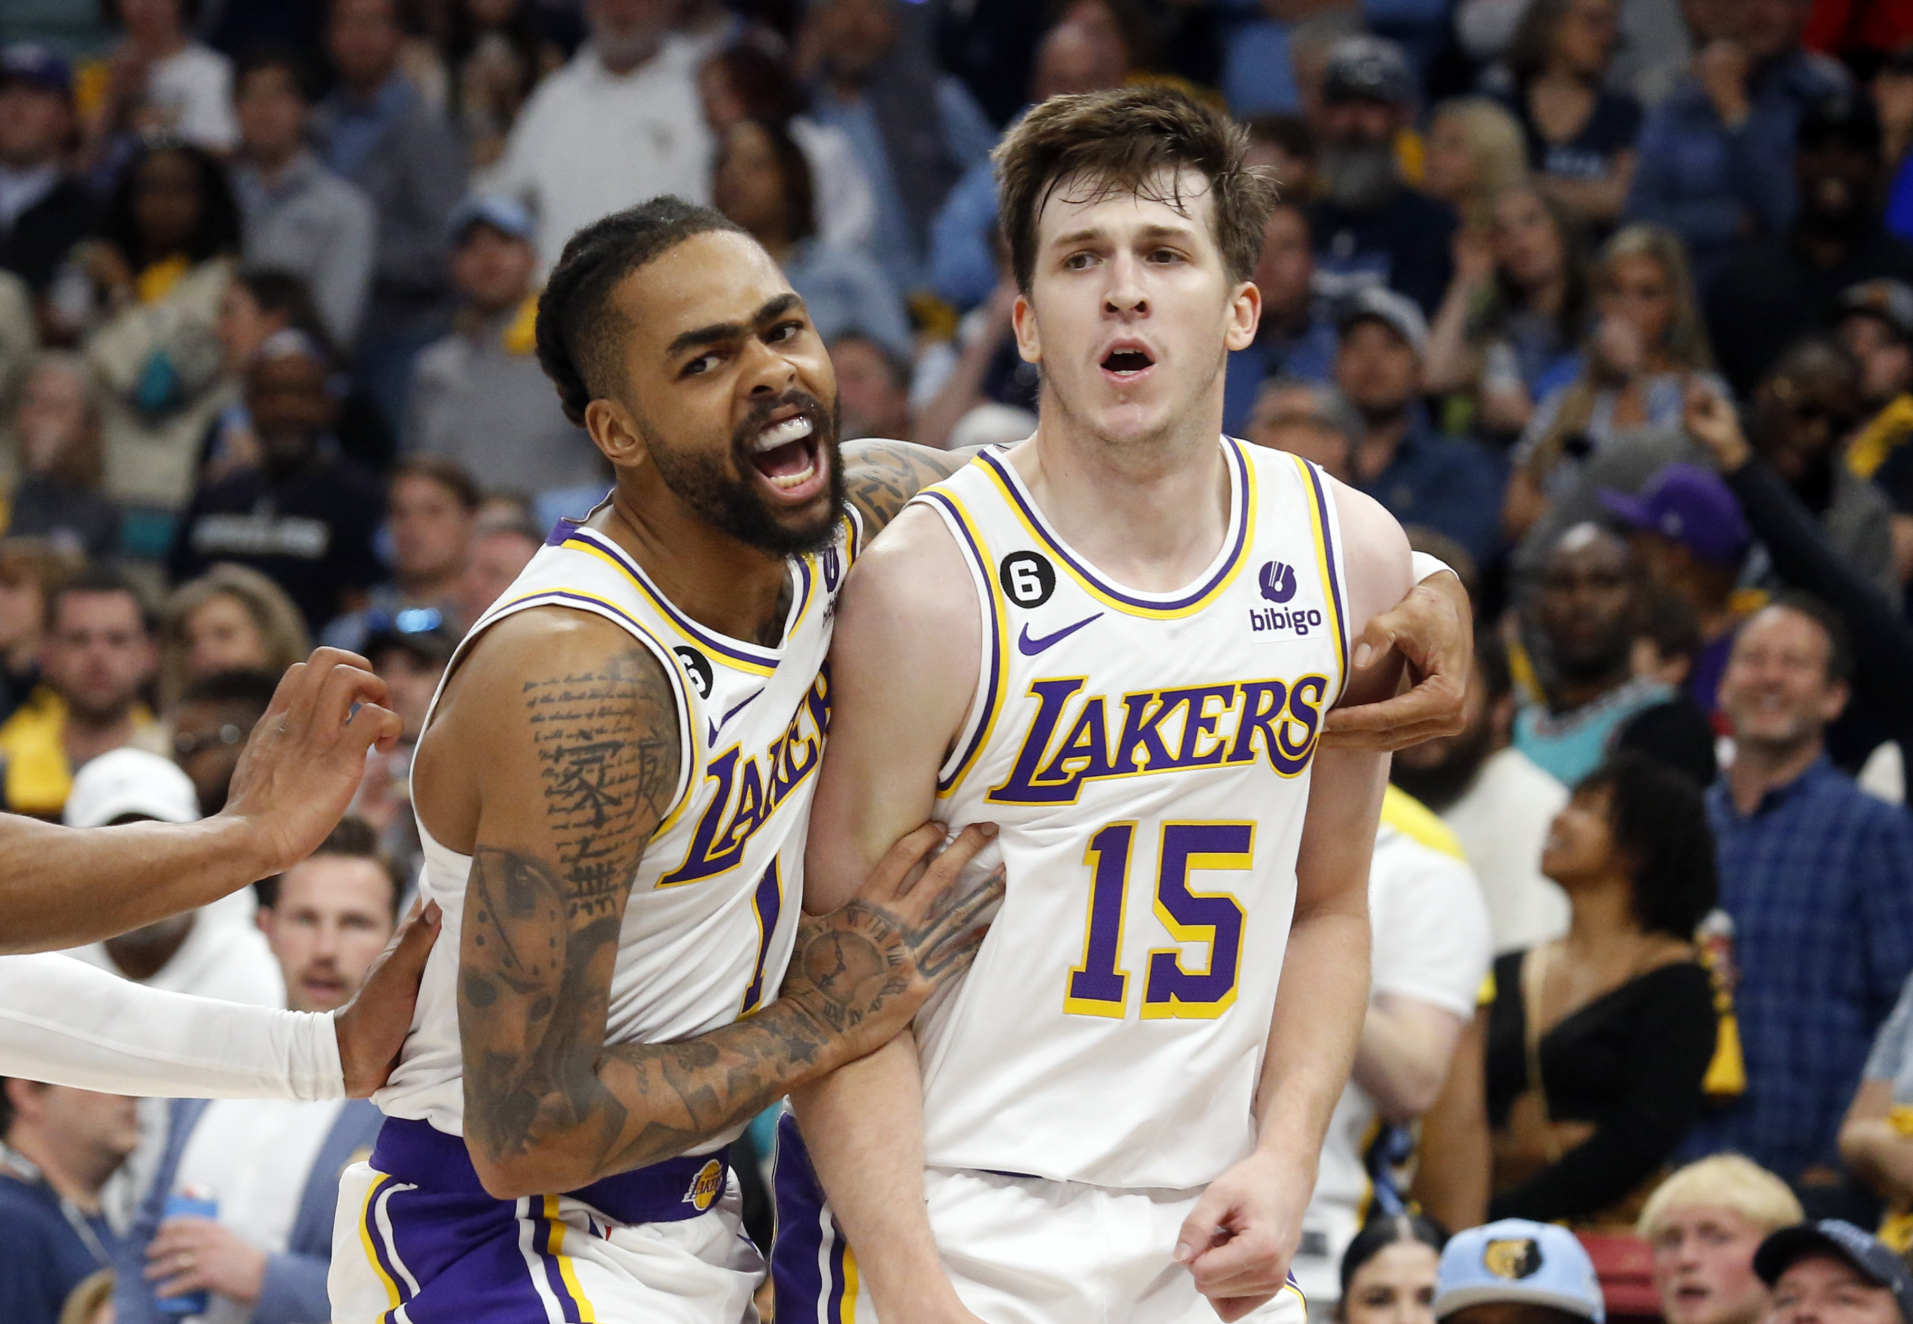 Austin Reaves is going to get paid, likely more than Lakers were hoping